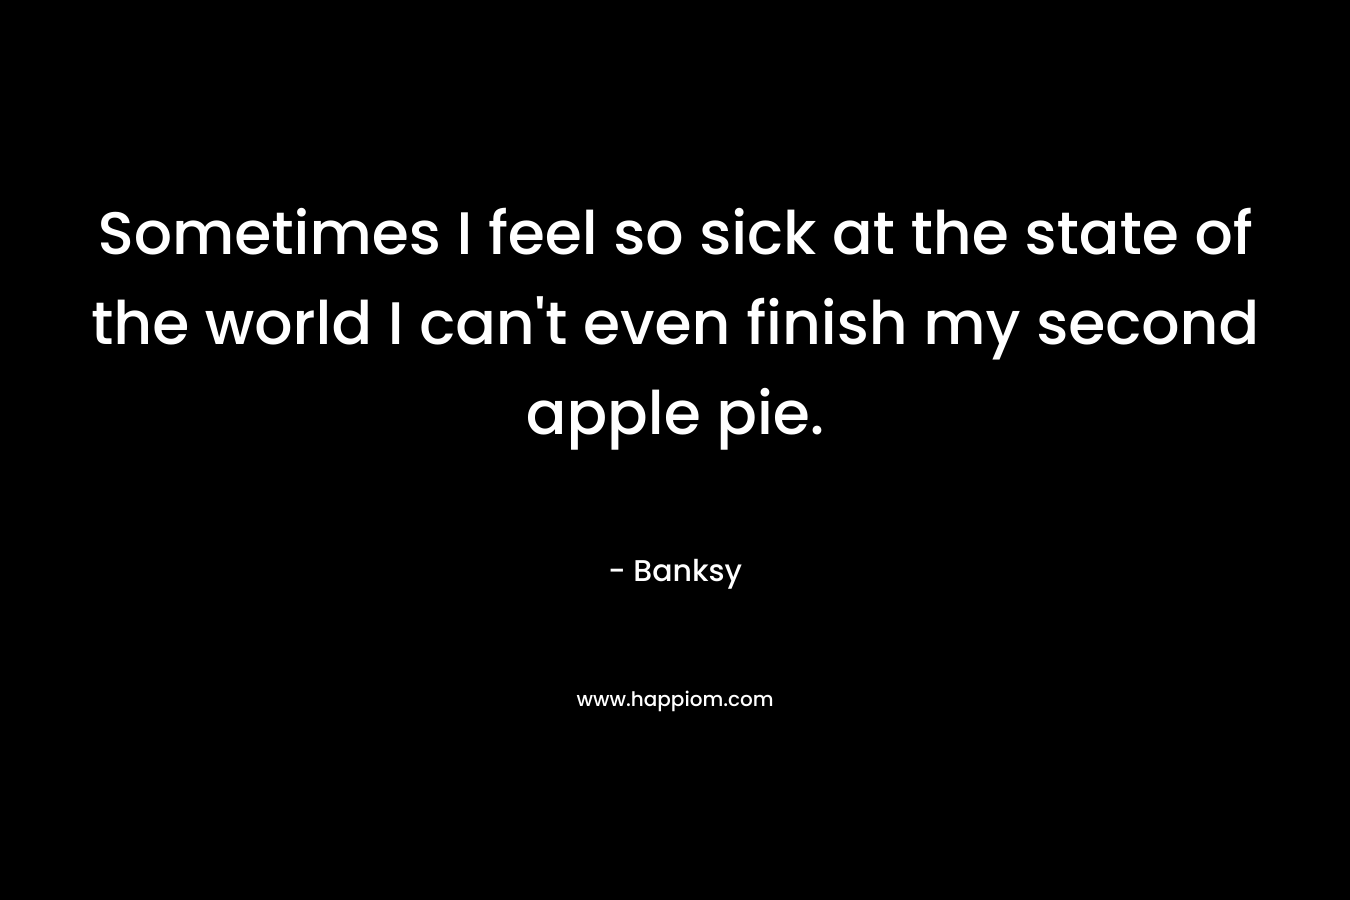 Sometimes I feel so sick at the state of the world I can’t even finish my second apple pie. – Banksy